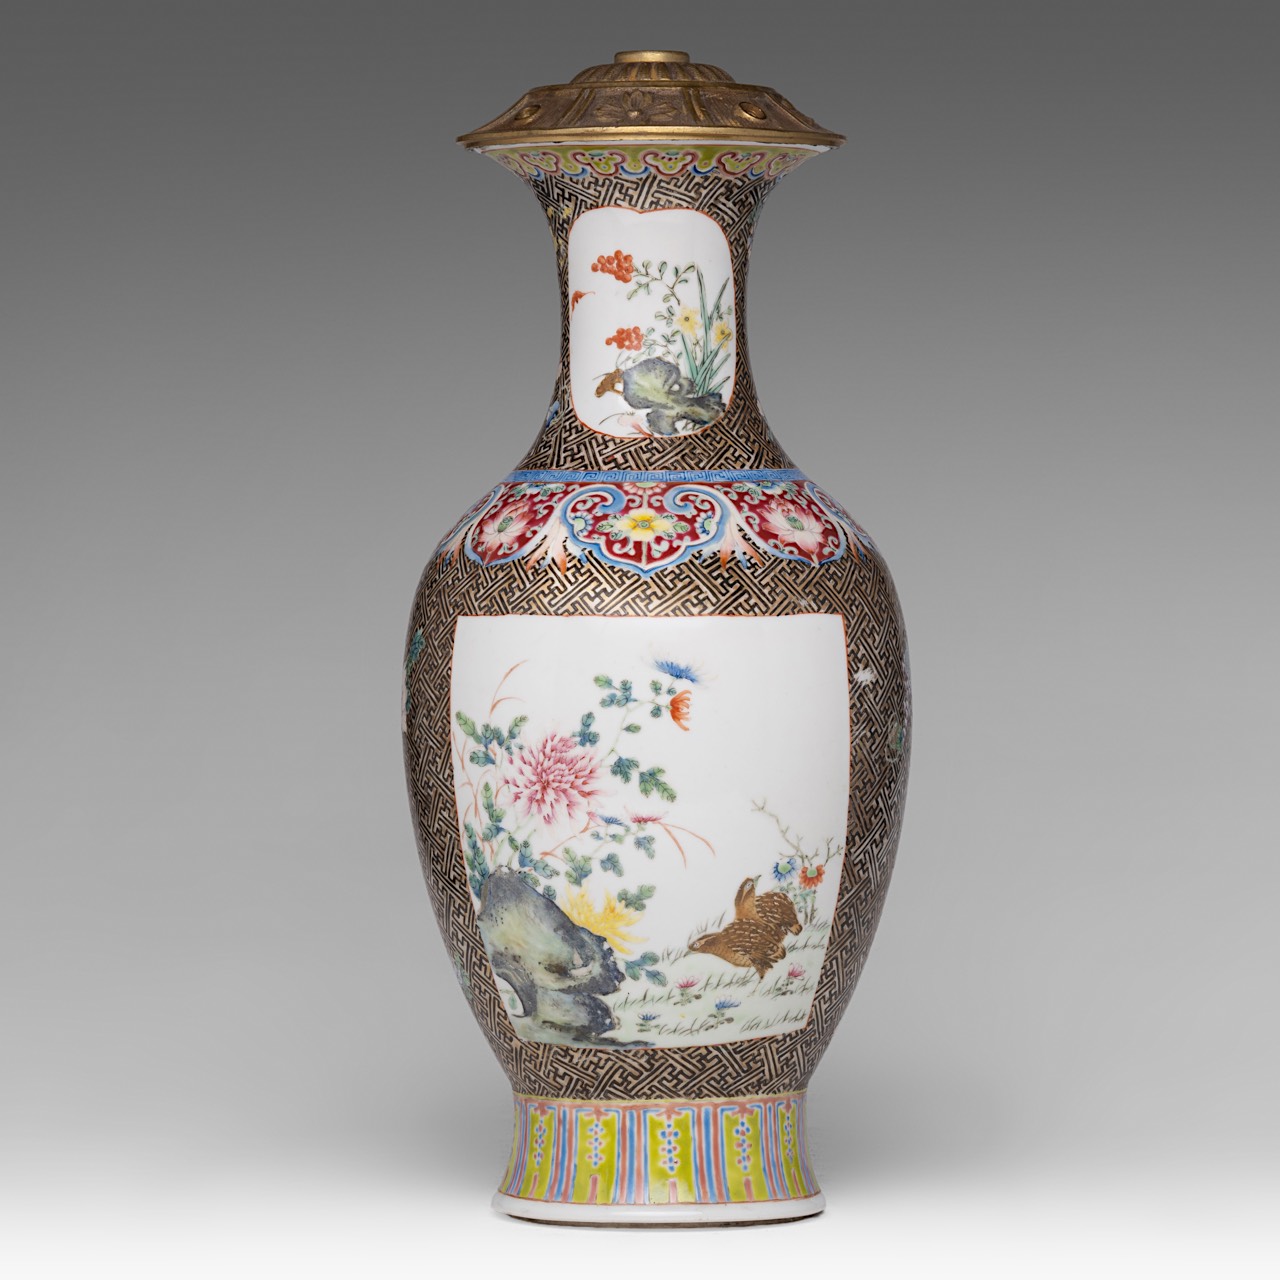 A fine Chinese famille rose 'Pheasants and Quails' baluster vase, with a Qianlong mark, late 19thC, - Image 3 of 6